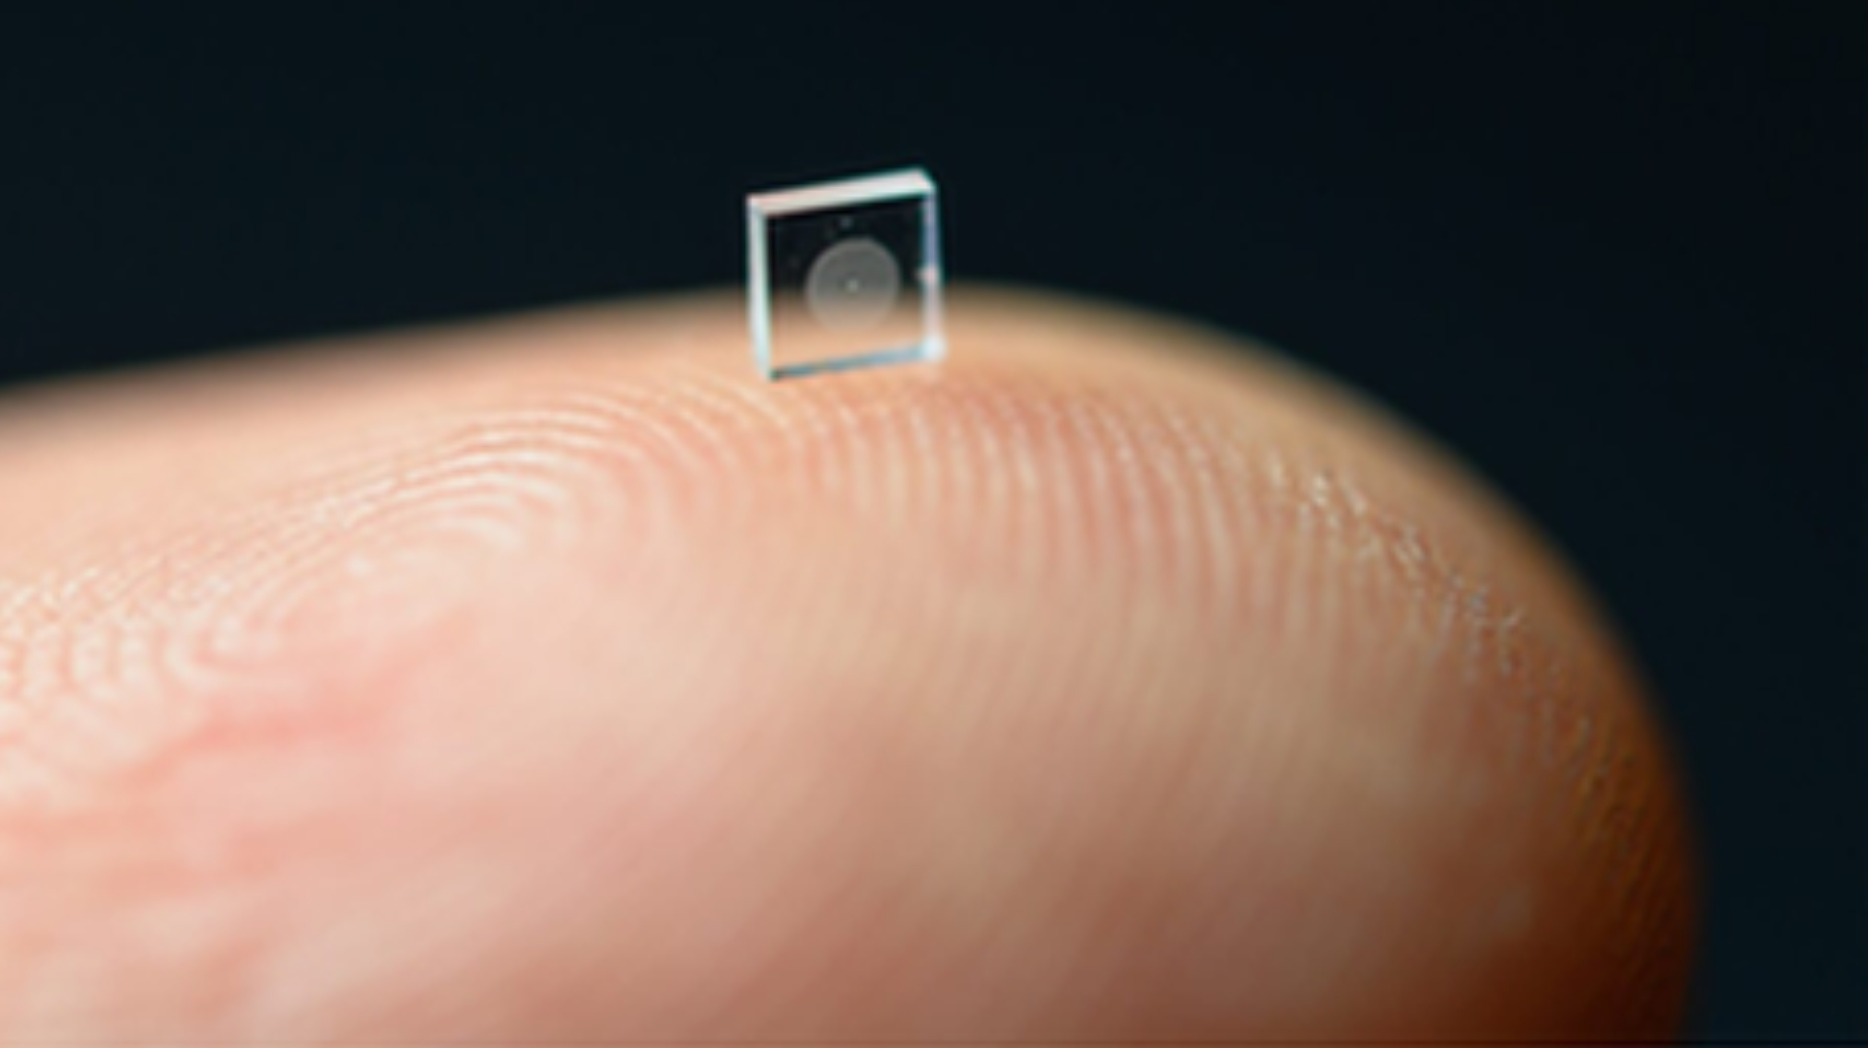 Scientists develop tiny camera the size of a grain of salt